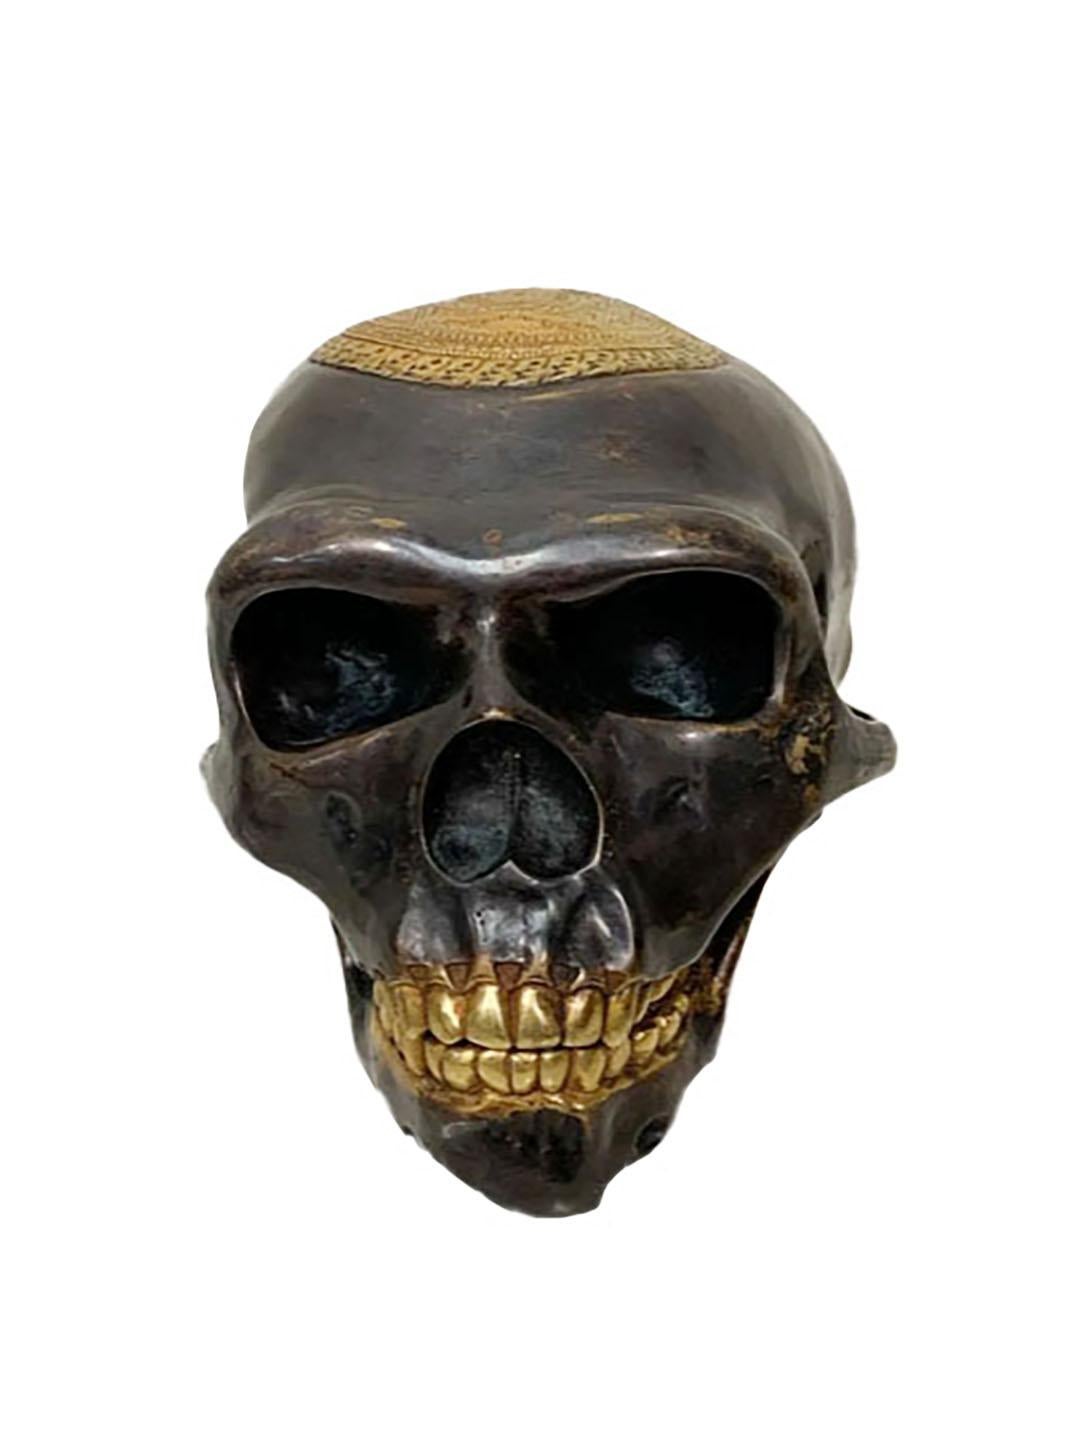 An early 21st century bronze skull with gilded mandala and gilded teeth. Very rare, from Tibet.